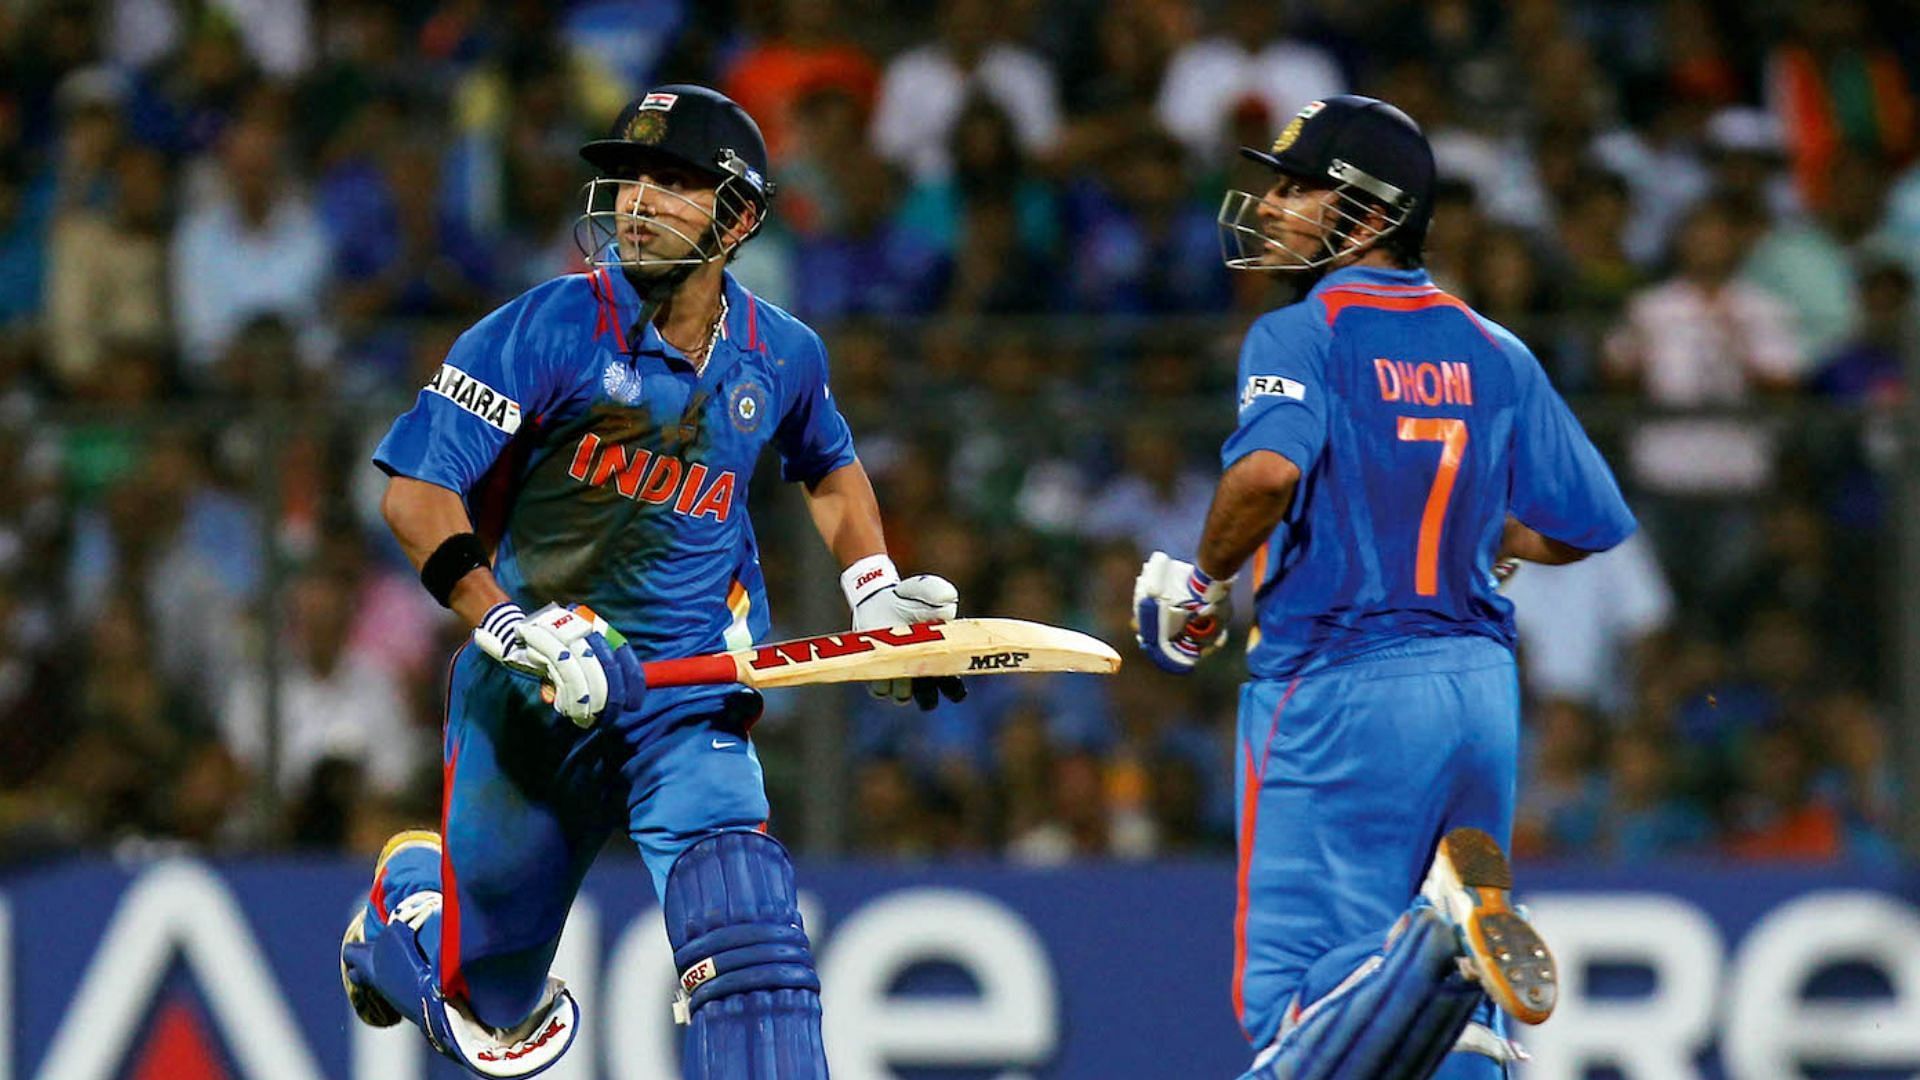 Gautam Gambhir had given absolutely everything on the field and was exhausted (P.C.:X)